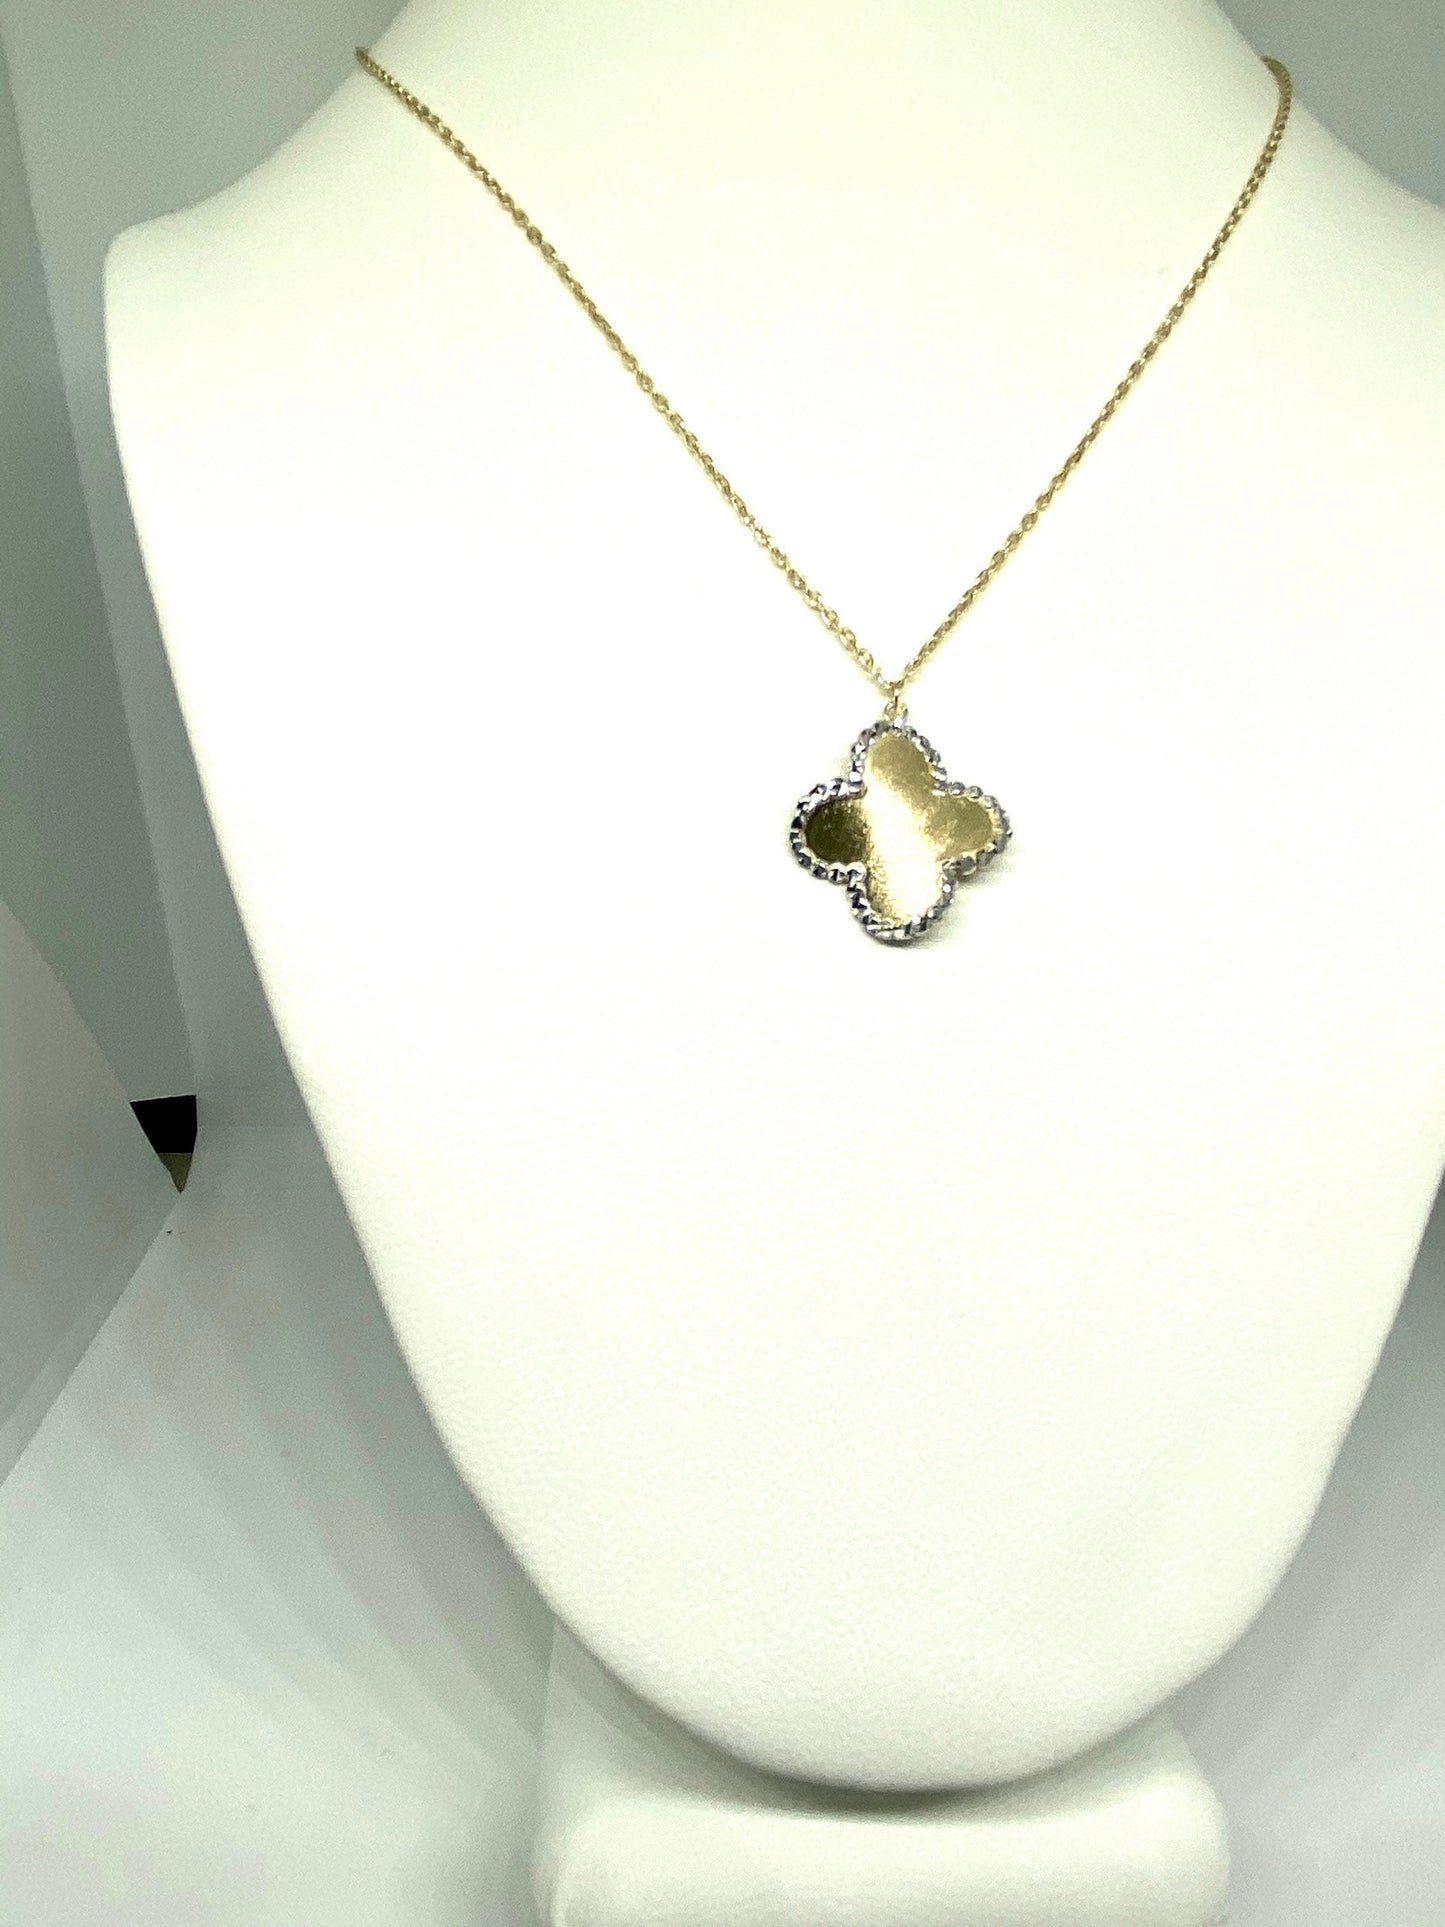 Yellow & White Gold Satin Finish Clover Pendant Chain Necklace